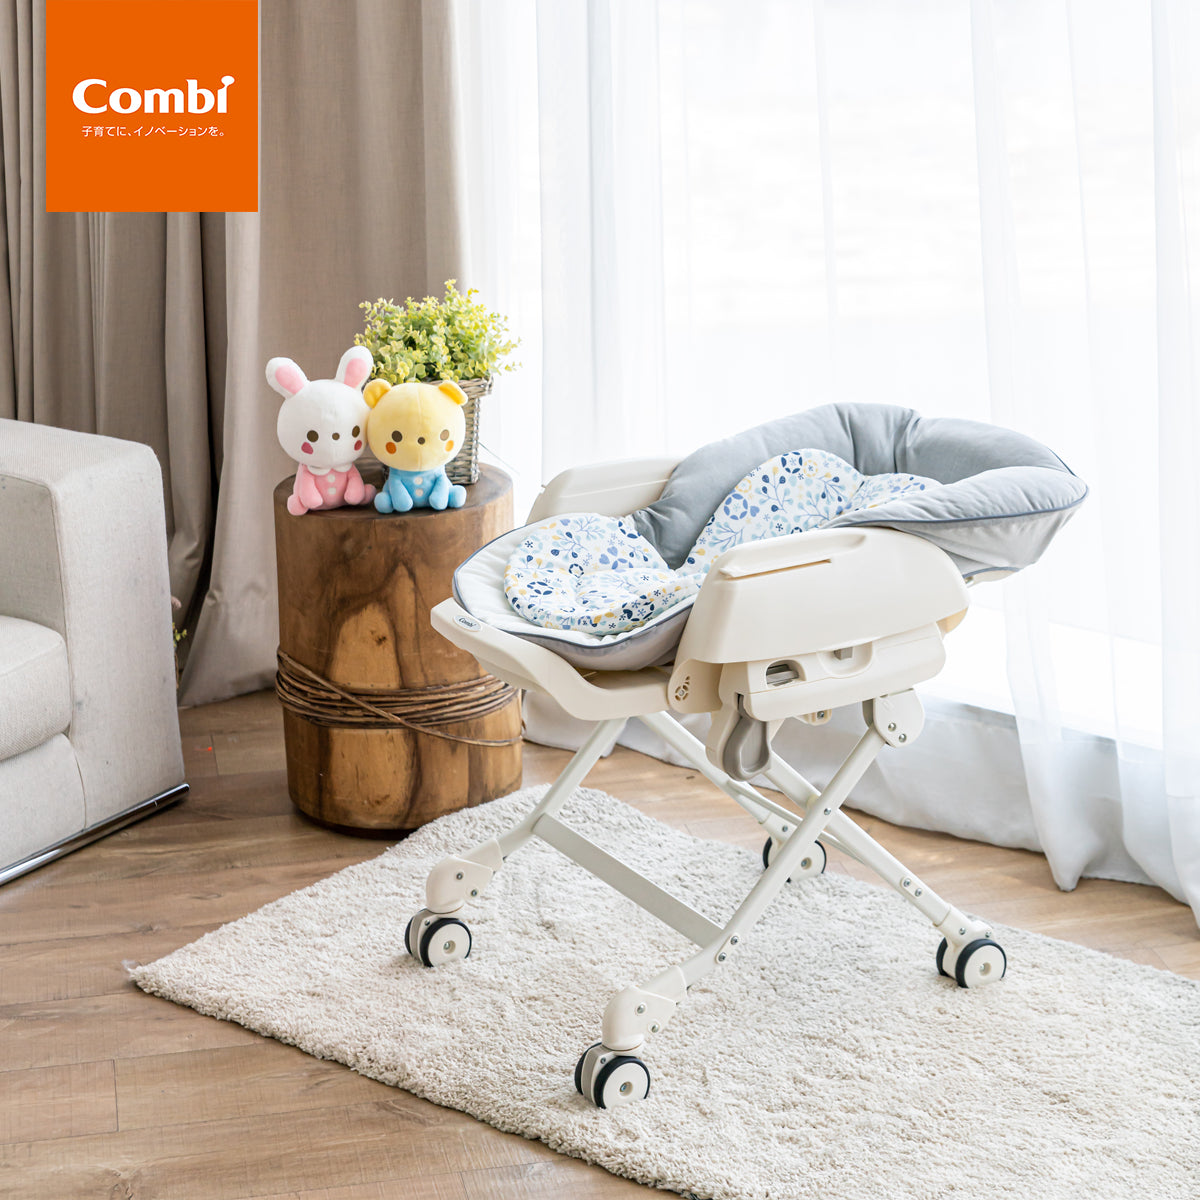 Combi Baby Dreamy Manual Baby Swing | Applicable Age: Newborn to 4 Years Old Approx.